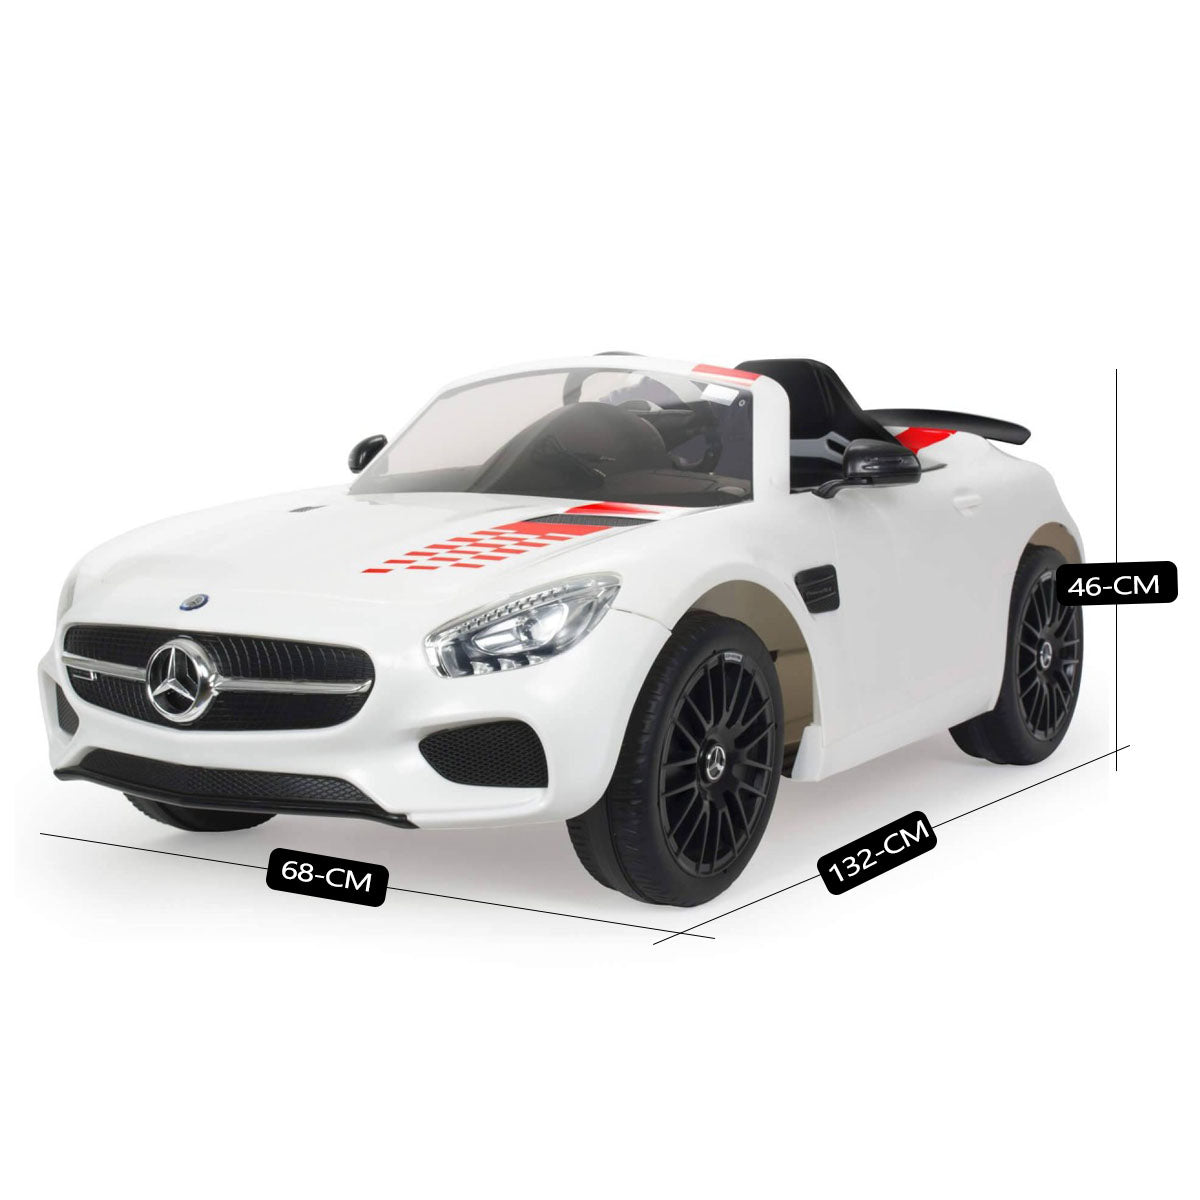 Injusa officially licensed Mercedes Benz | Ride on car | Model No.Gt-S With Remote Control(white)